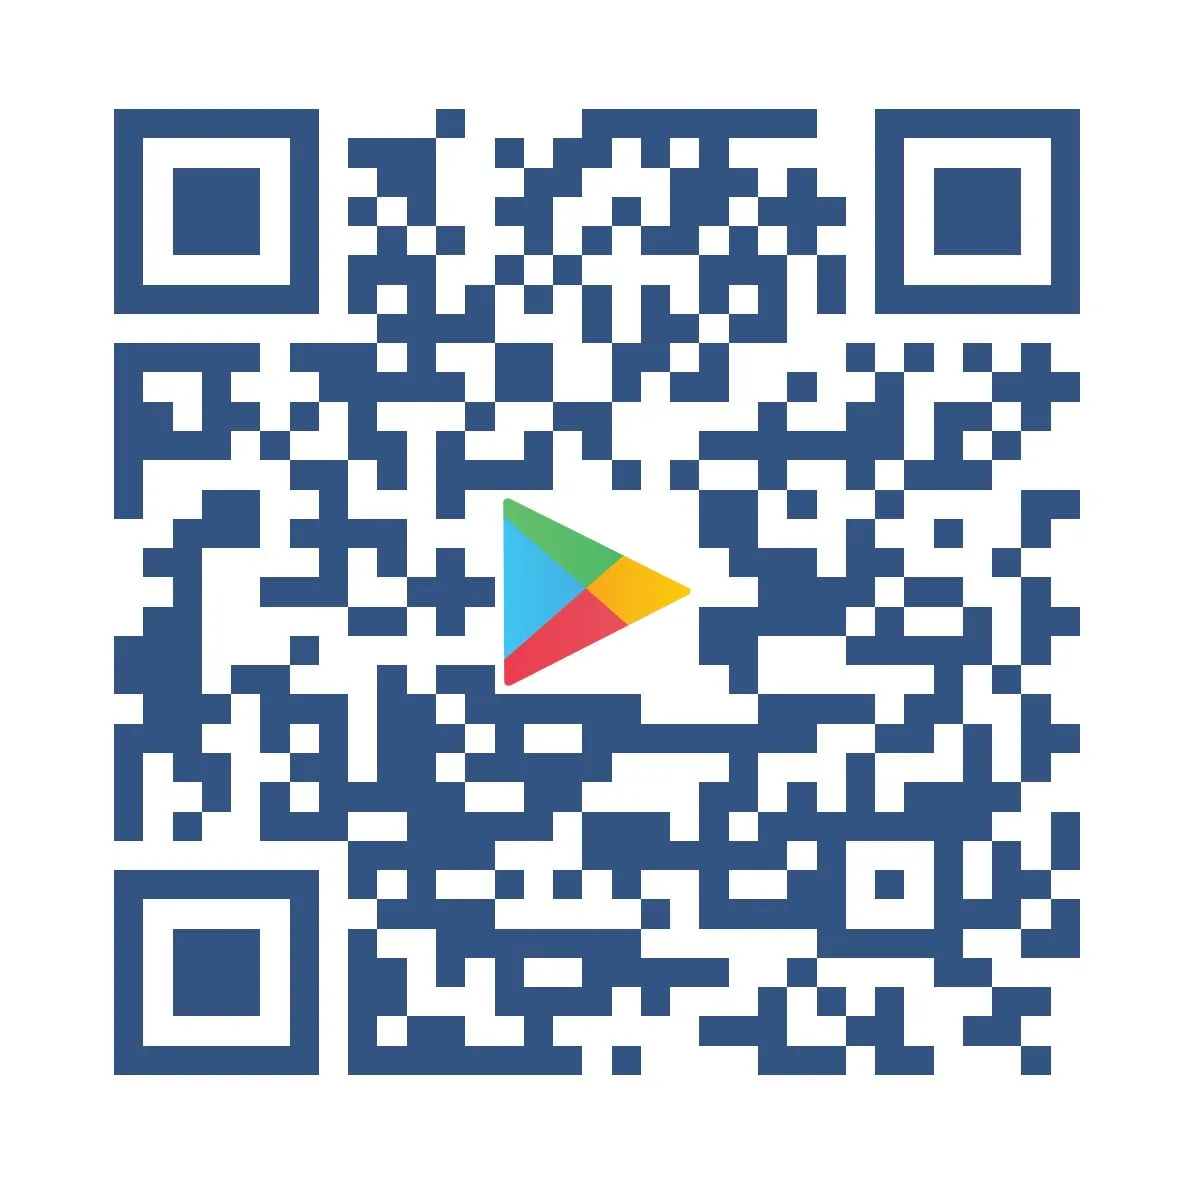 QR-code Android mobile app - Icryptobook